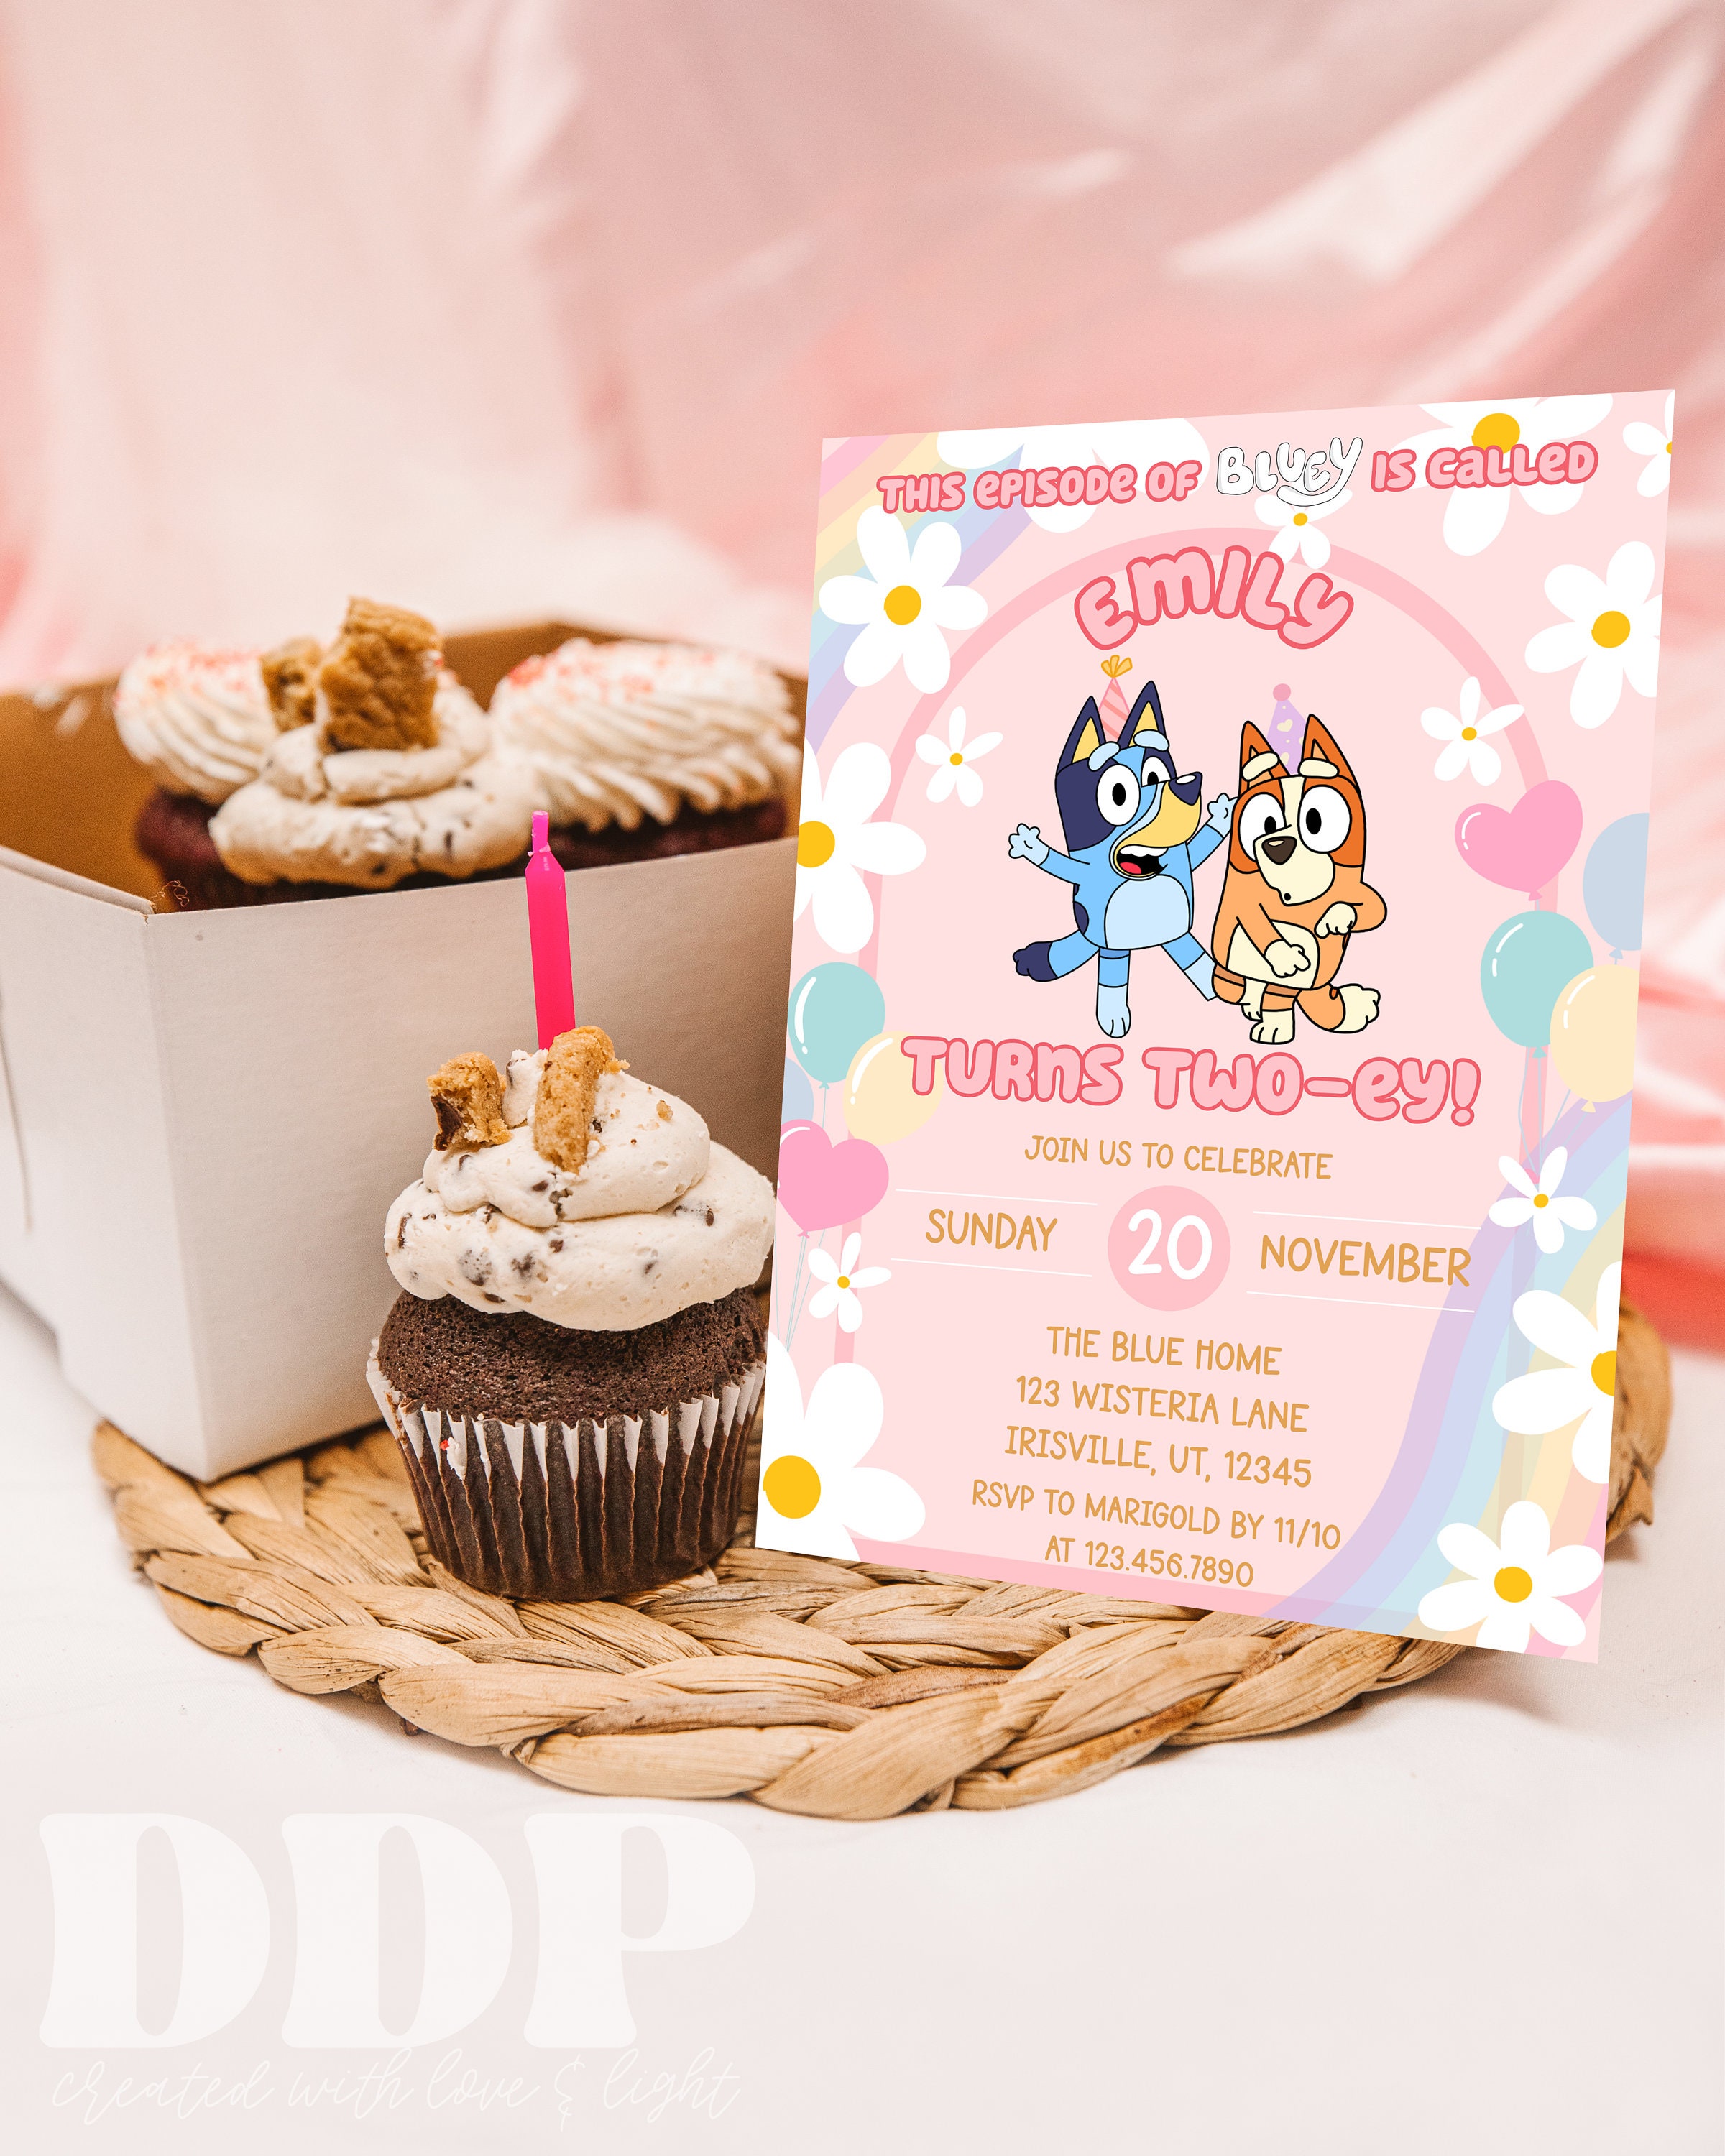 Personalized Printable Pink-themed Bluey Birthday Party Banner for